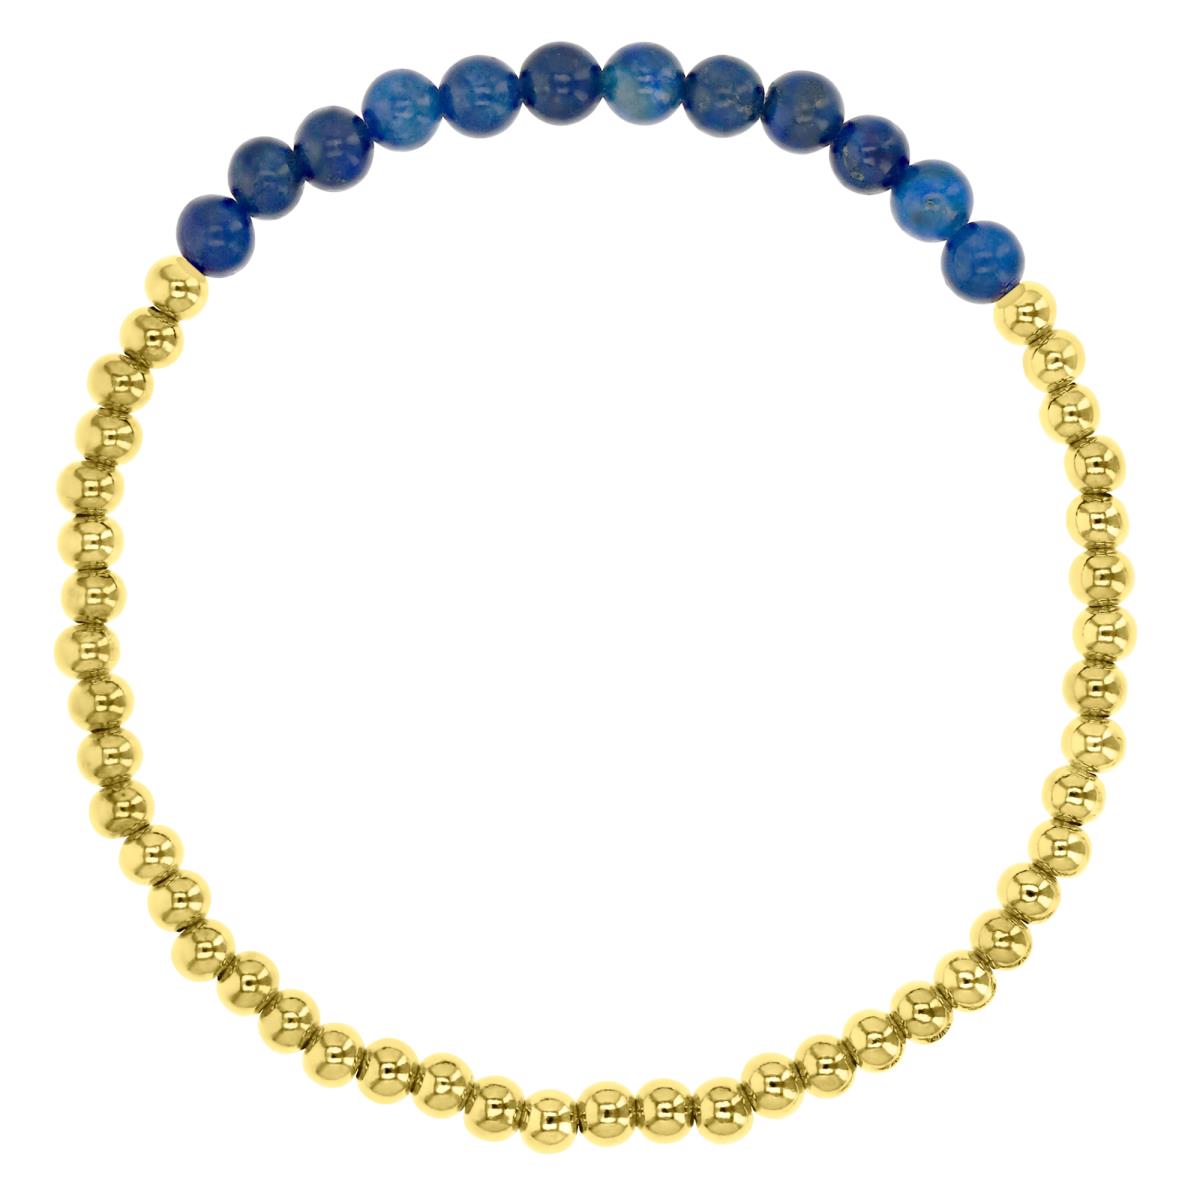 Sterling Silver Yellow Plated 5MM Polished Beaded Lapis 7.5" Bracelet